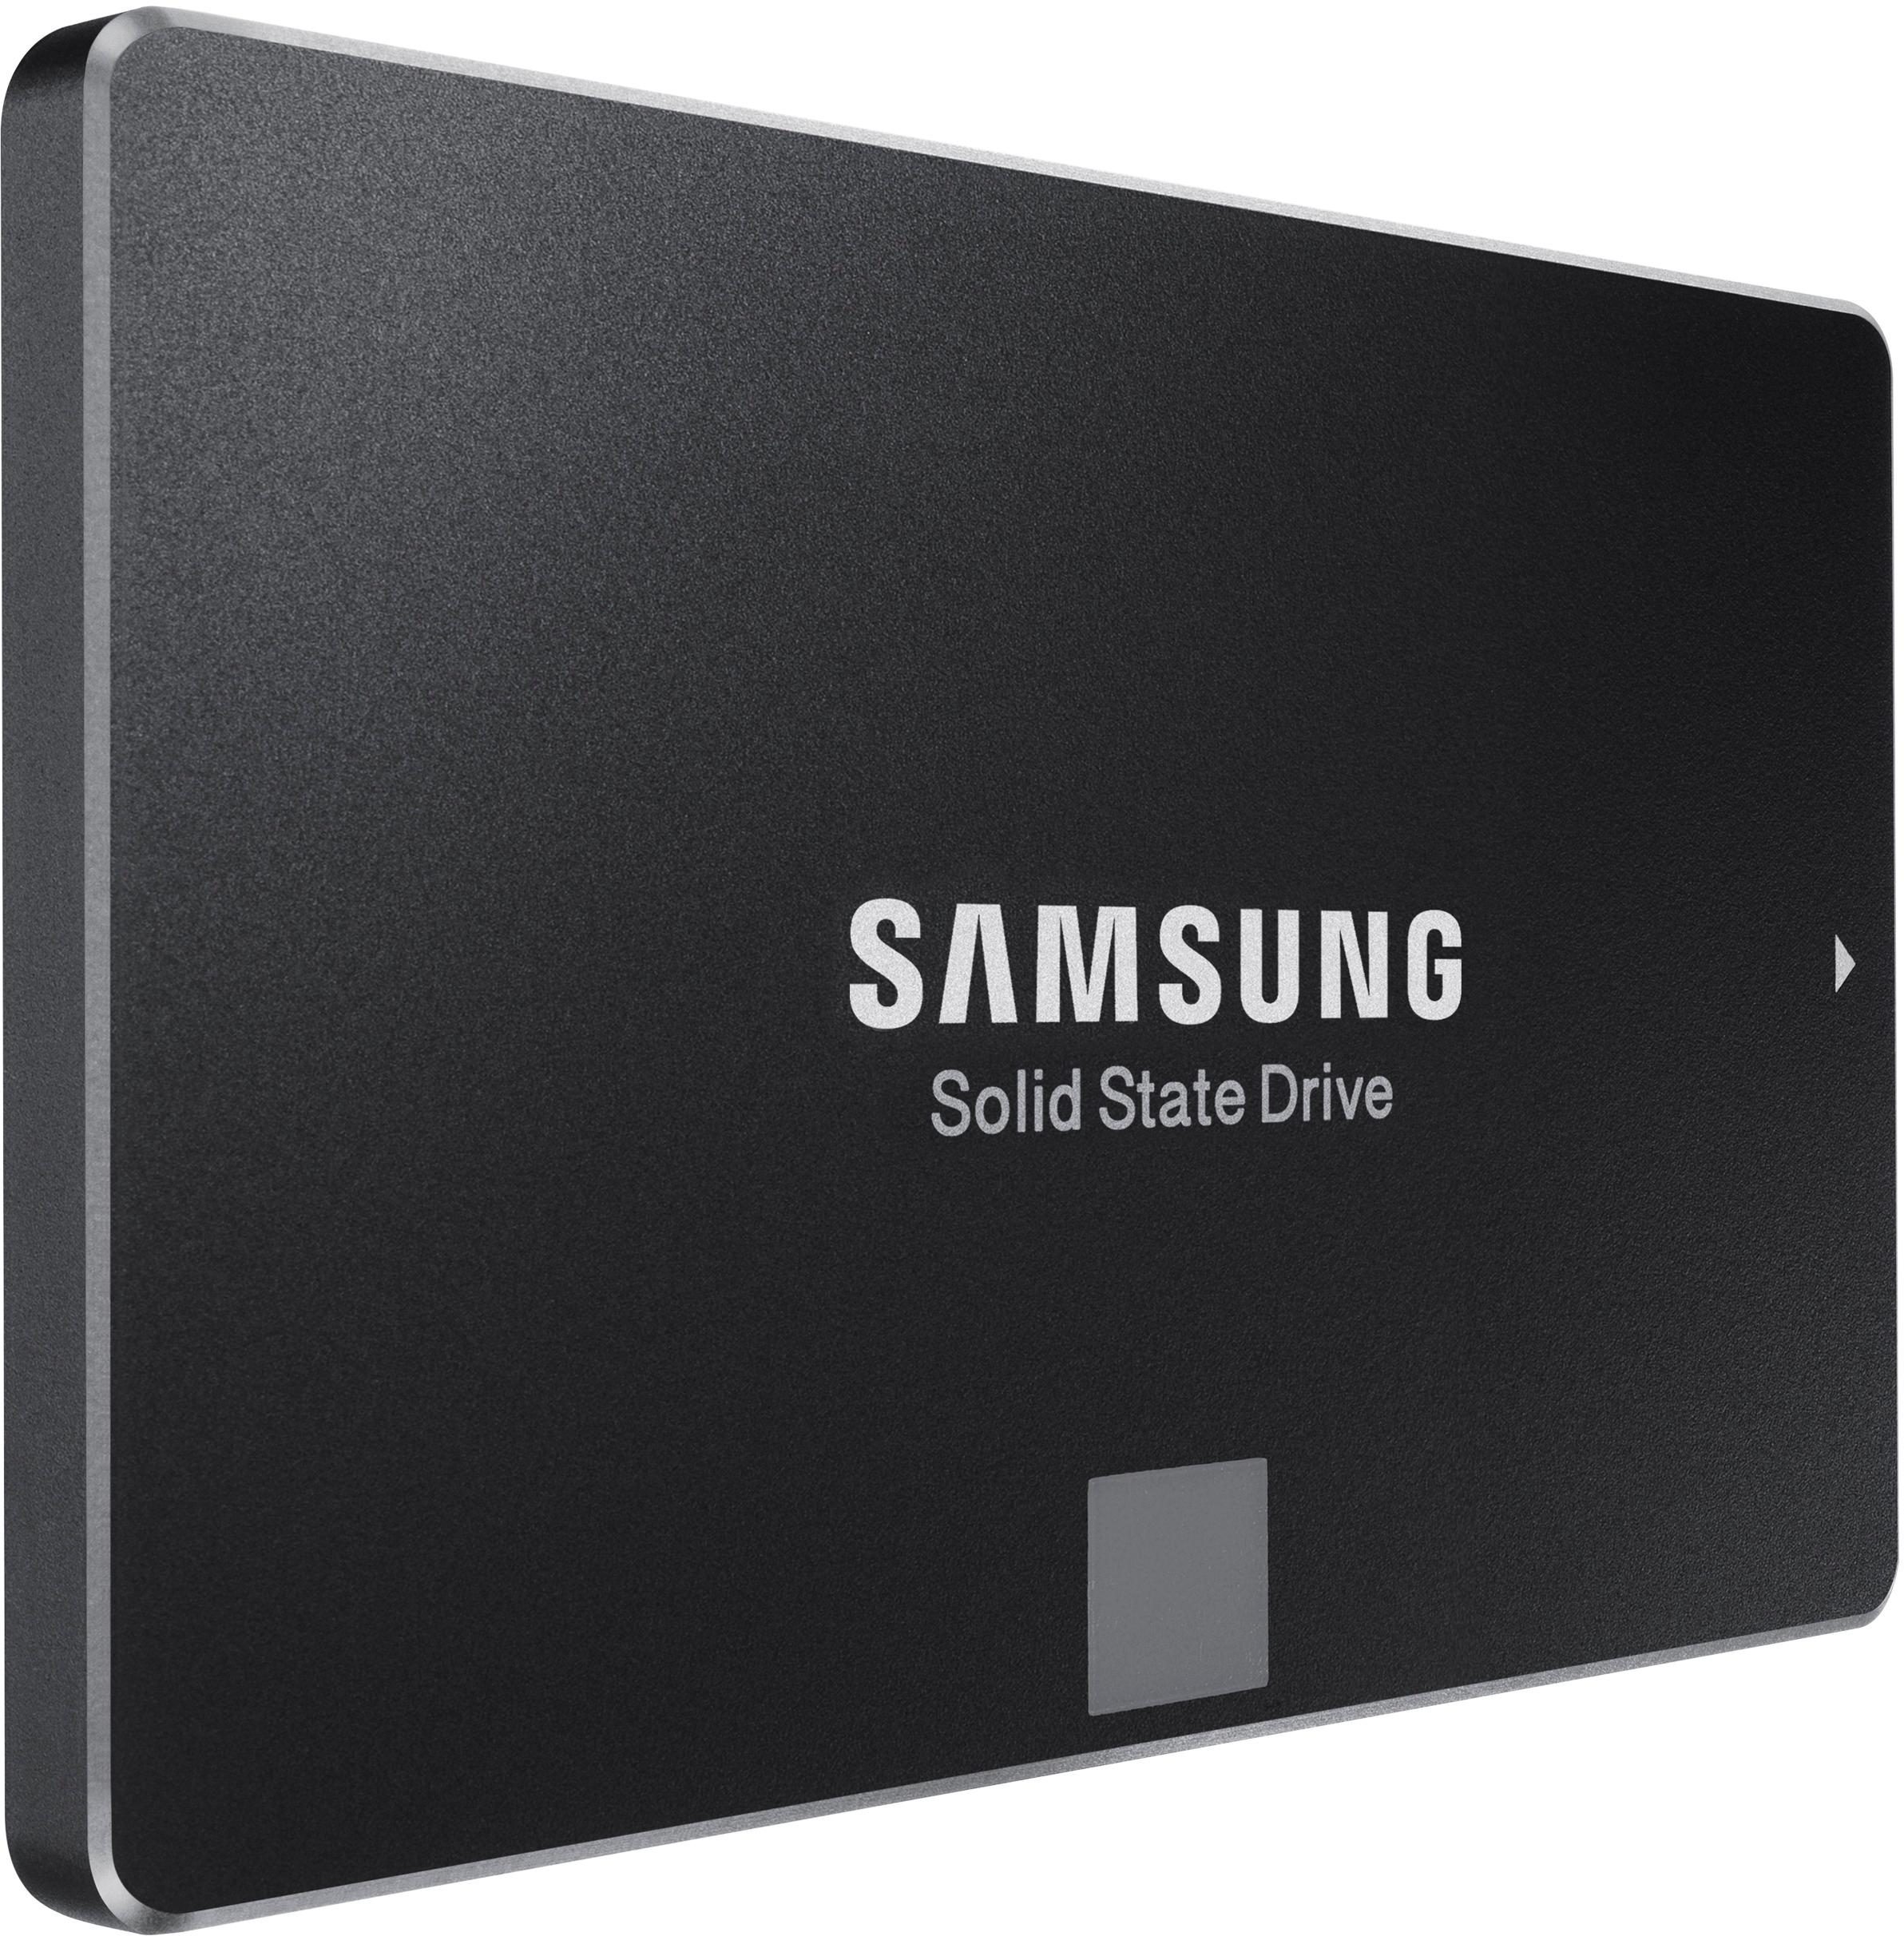 Samsung 860 EVO review: Further proof that TLC-NAND SSD can be fast and  affordable